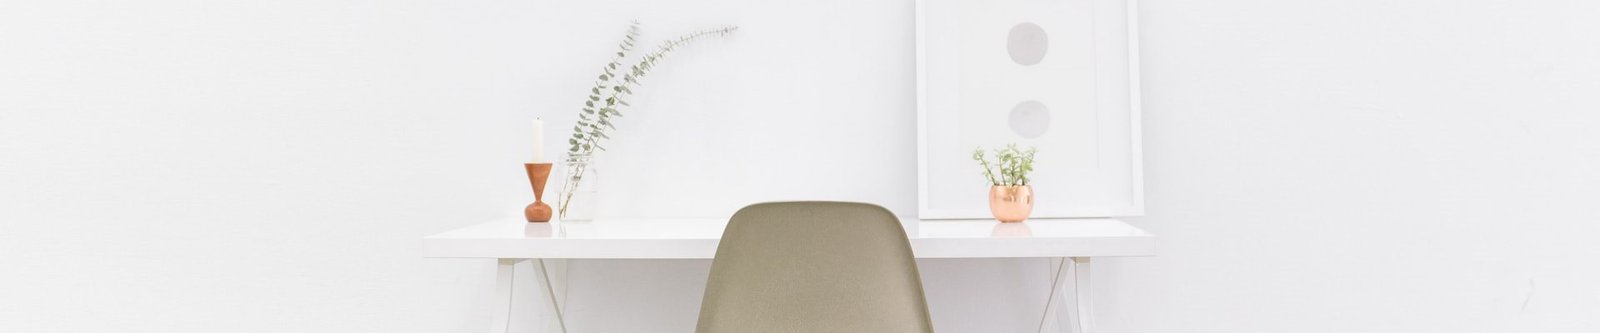 A white chair and desk in front of a wall